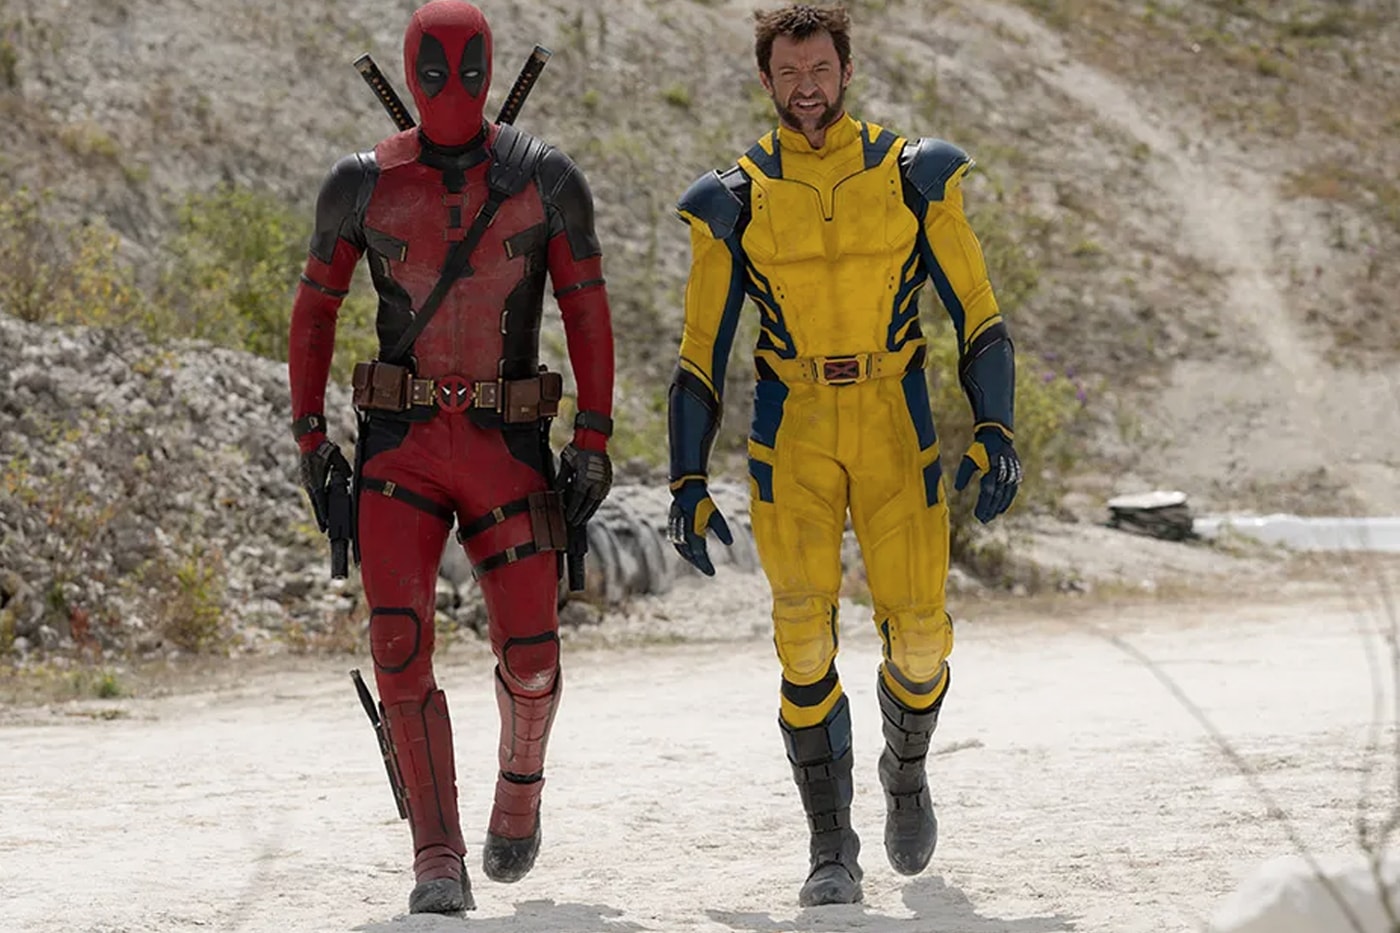 Kevin Feige Admits He Originally Told Hugh Jackman Not To Come back as Wolverine and Rejected the Initial 'Deadpool 3' Pitch rashomono style film deadpool and wolverine marvel cinematic universe mcu